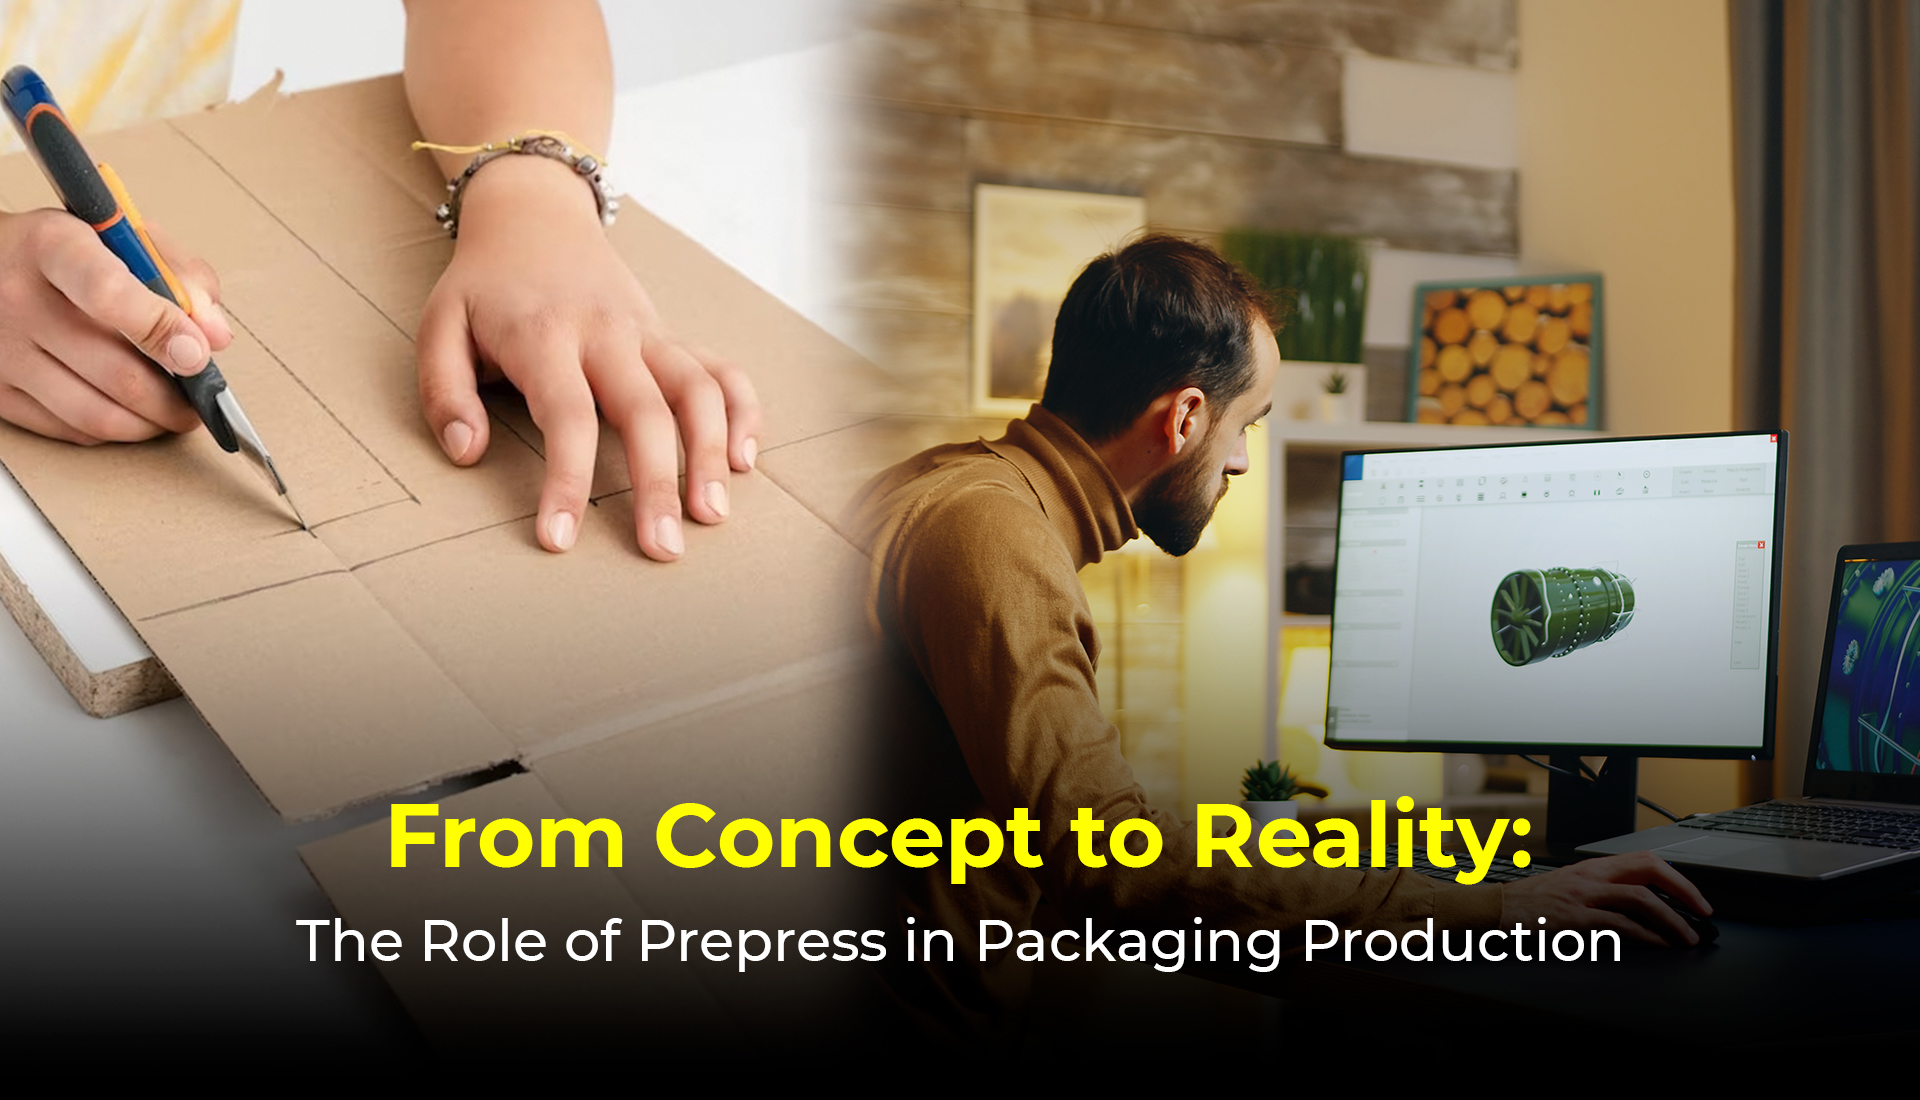 The Role of Prepress in Packaging Production